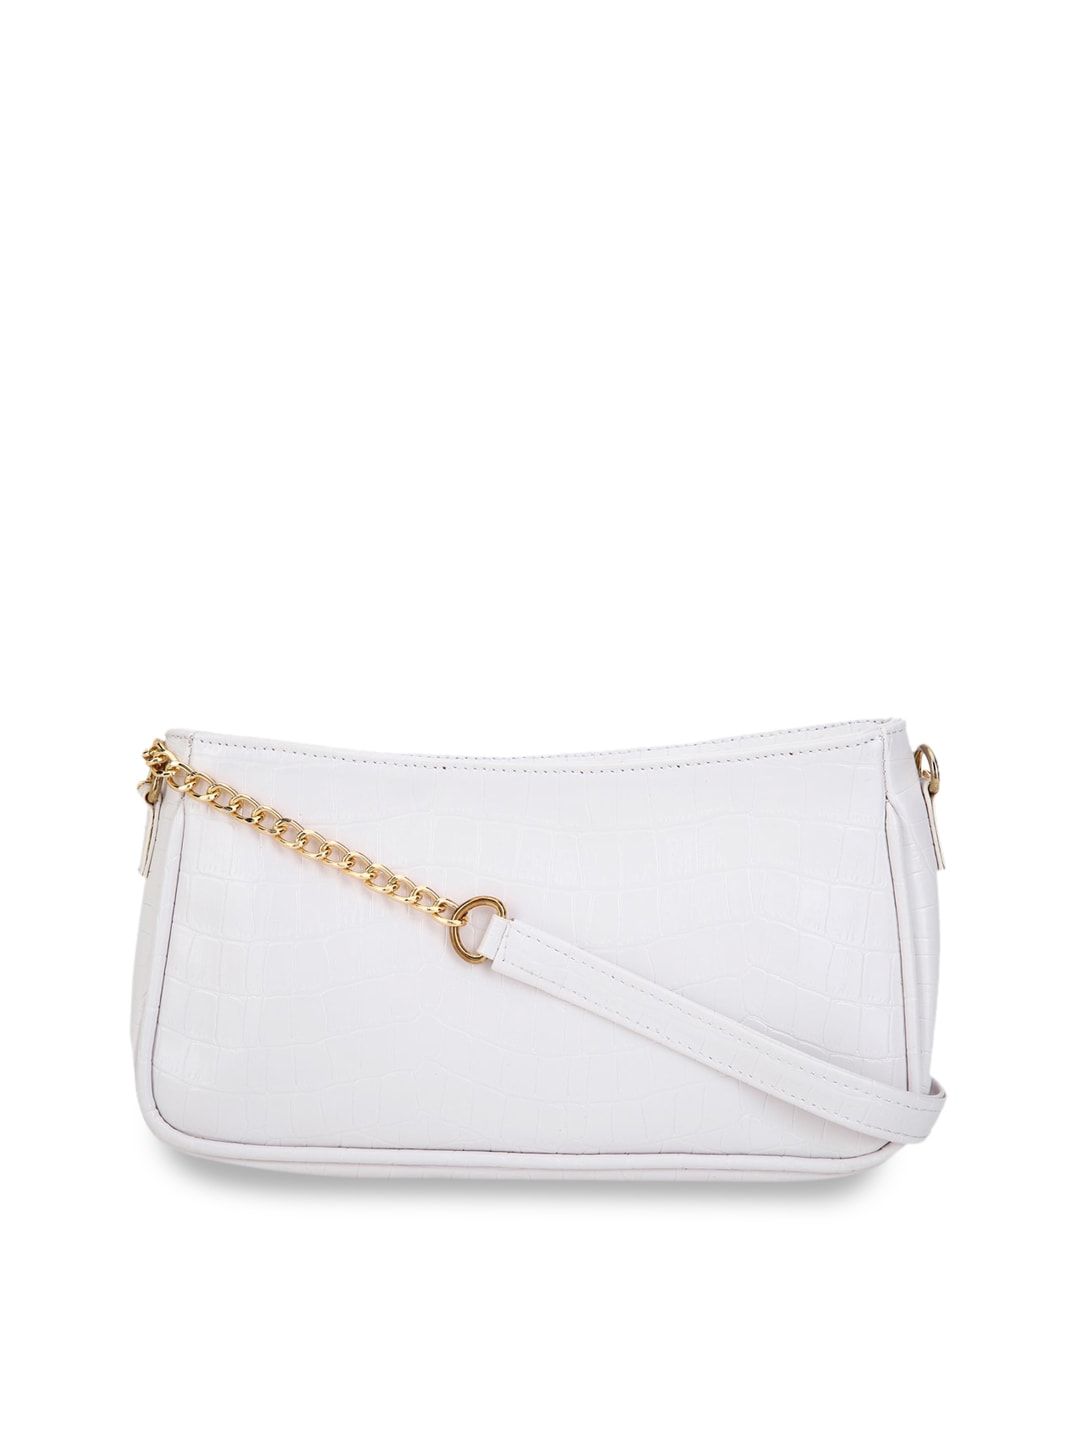 FOREVER 21 White PU Structured Sling Bag Price in India